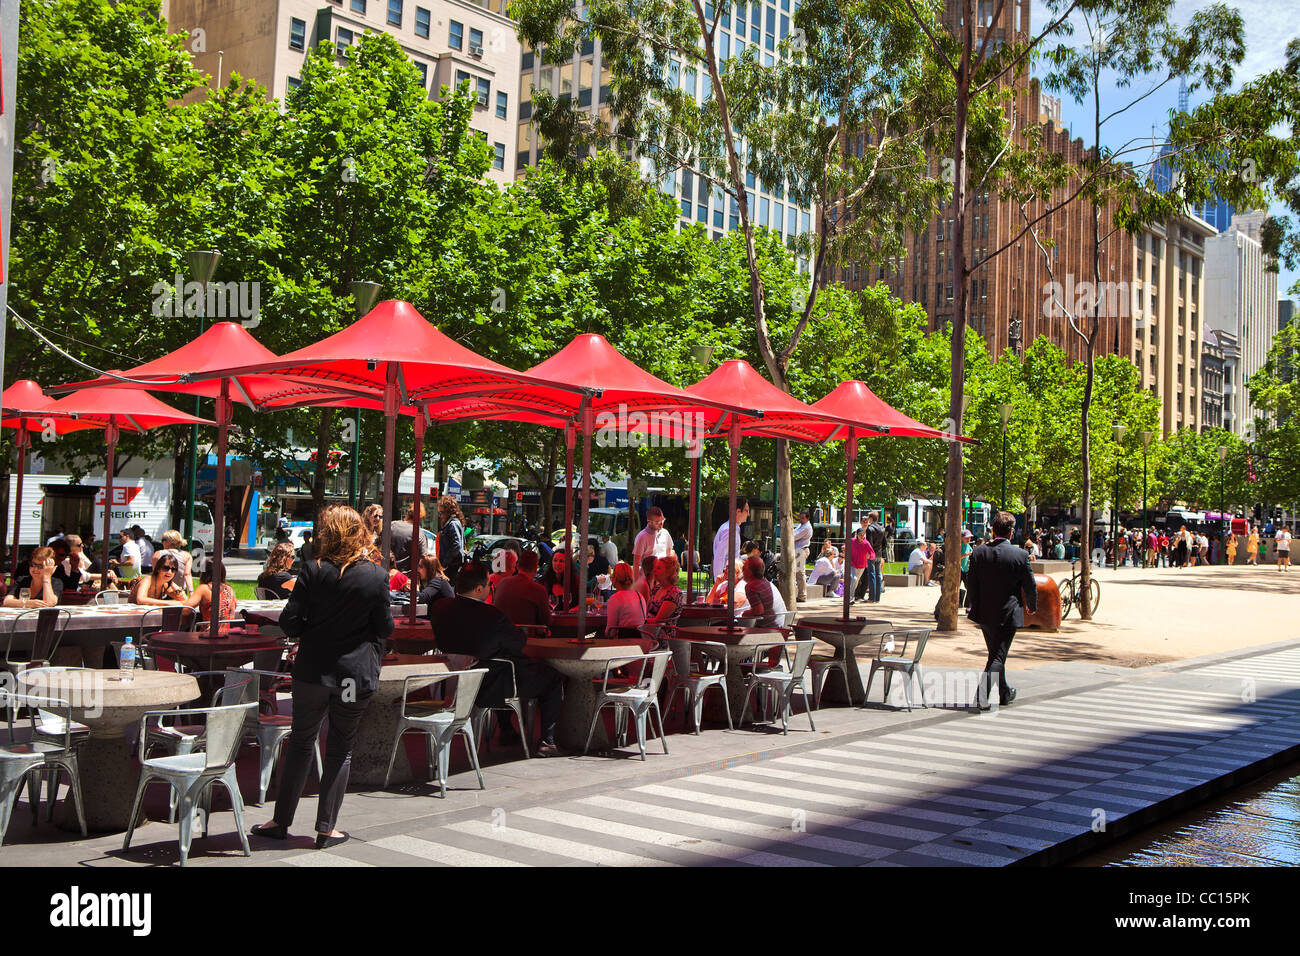 Melbourne city square Australian city center people enjoying the sunny weather in the city square cafe's Australia victoria. Stock Photo